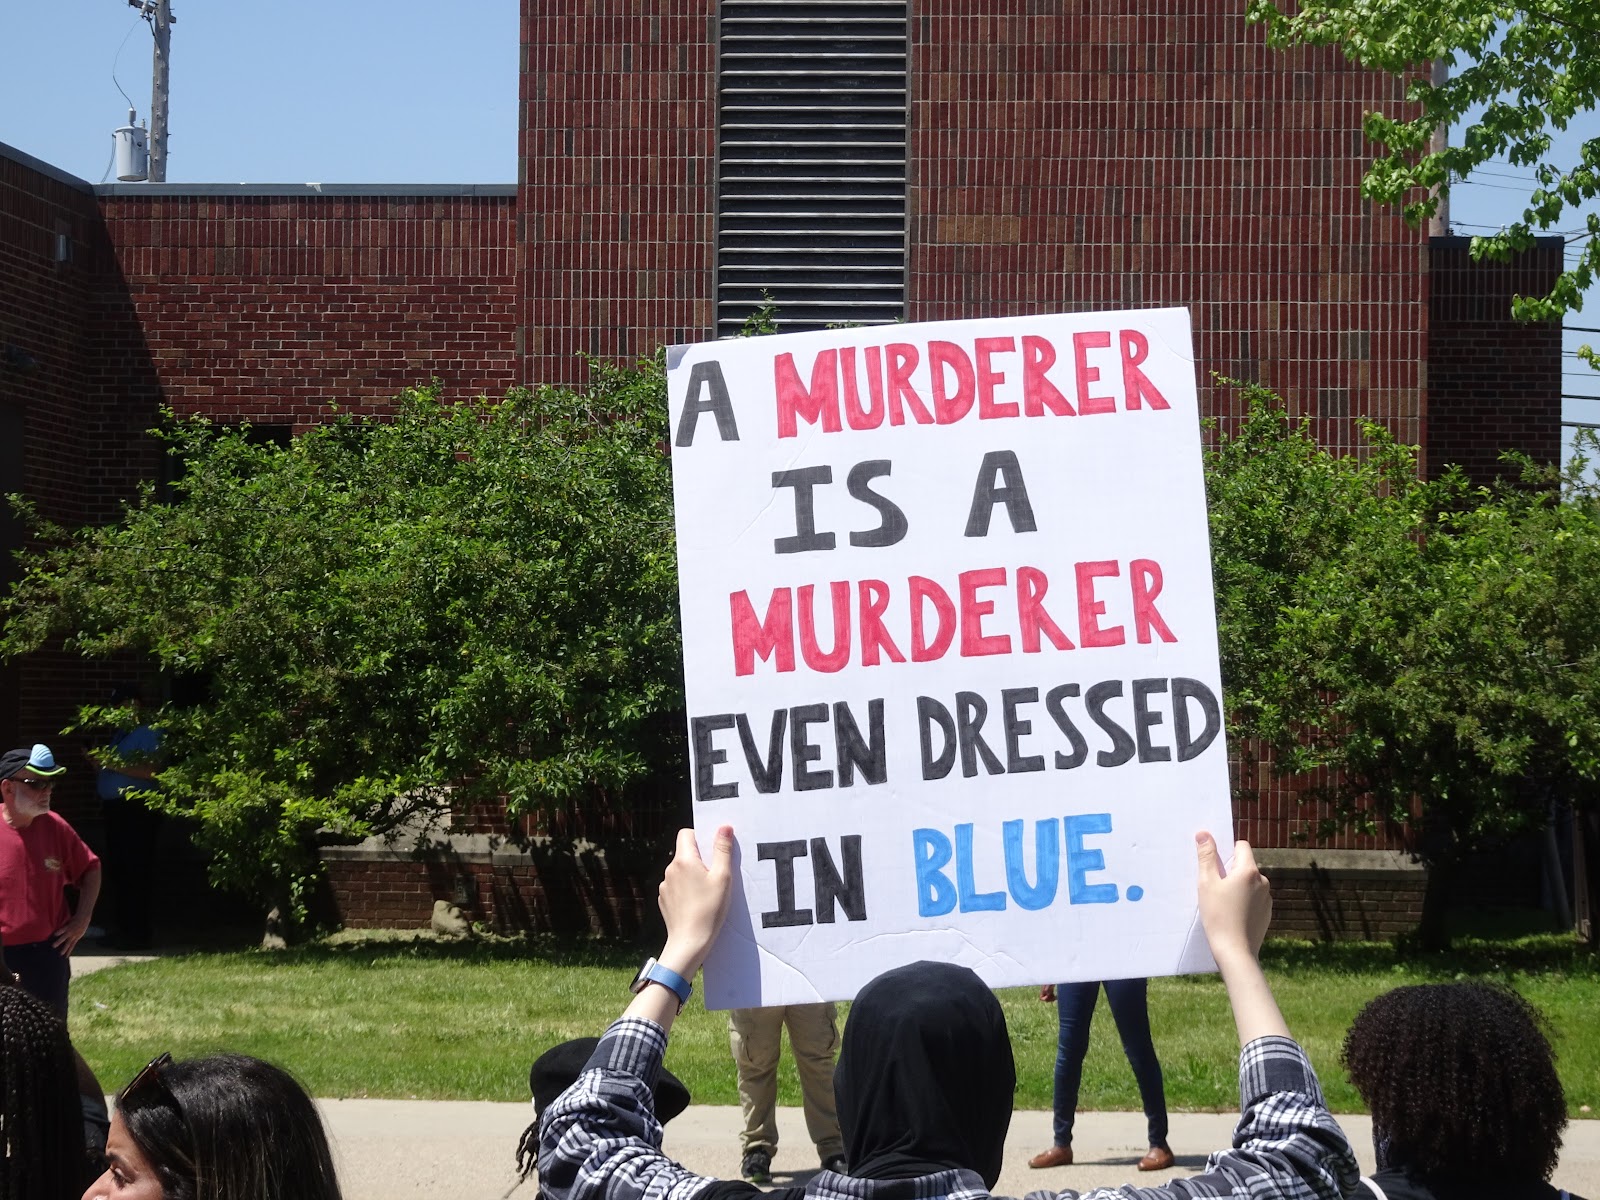 https://upload.wikimedia.org/wikipedia/commons/a/ae/A_murderer_is_a_murderer_-_George_Floyd_protests%2C_East_Lansing%2C_Michigan.jpg